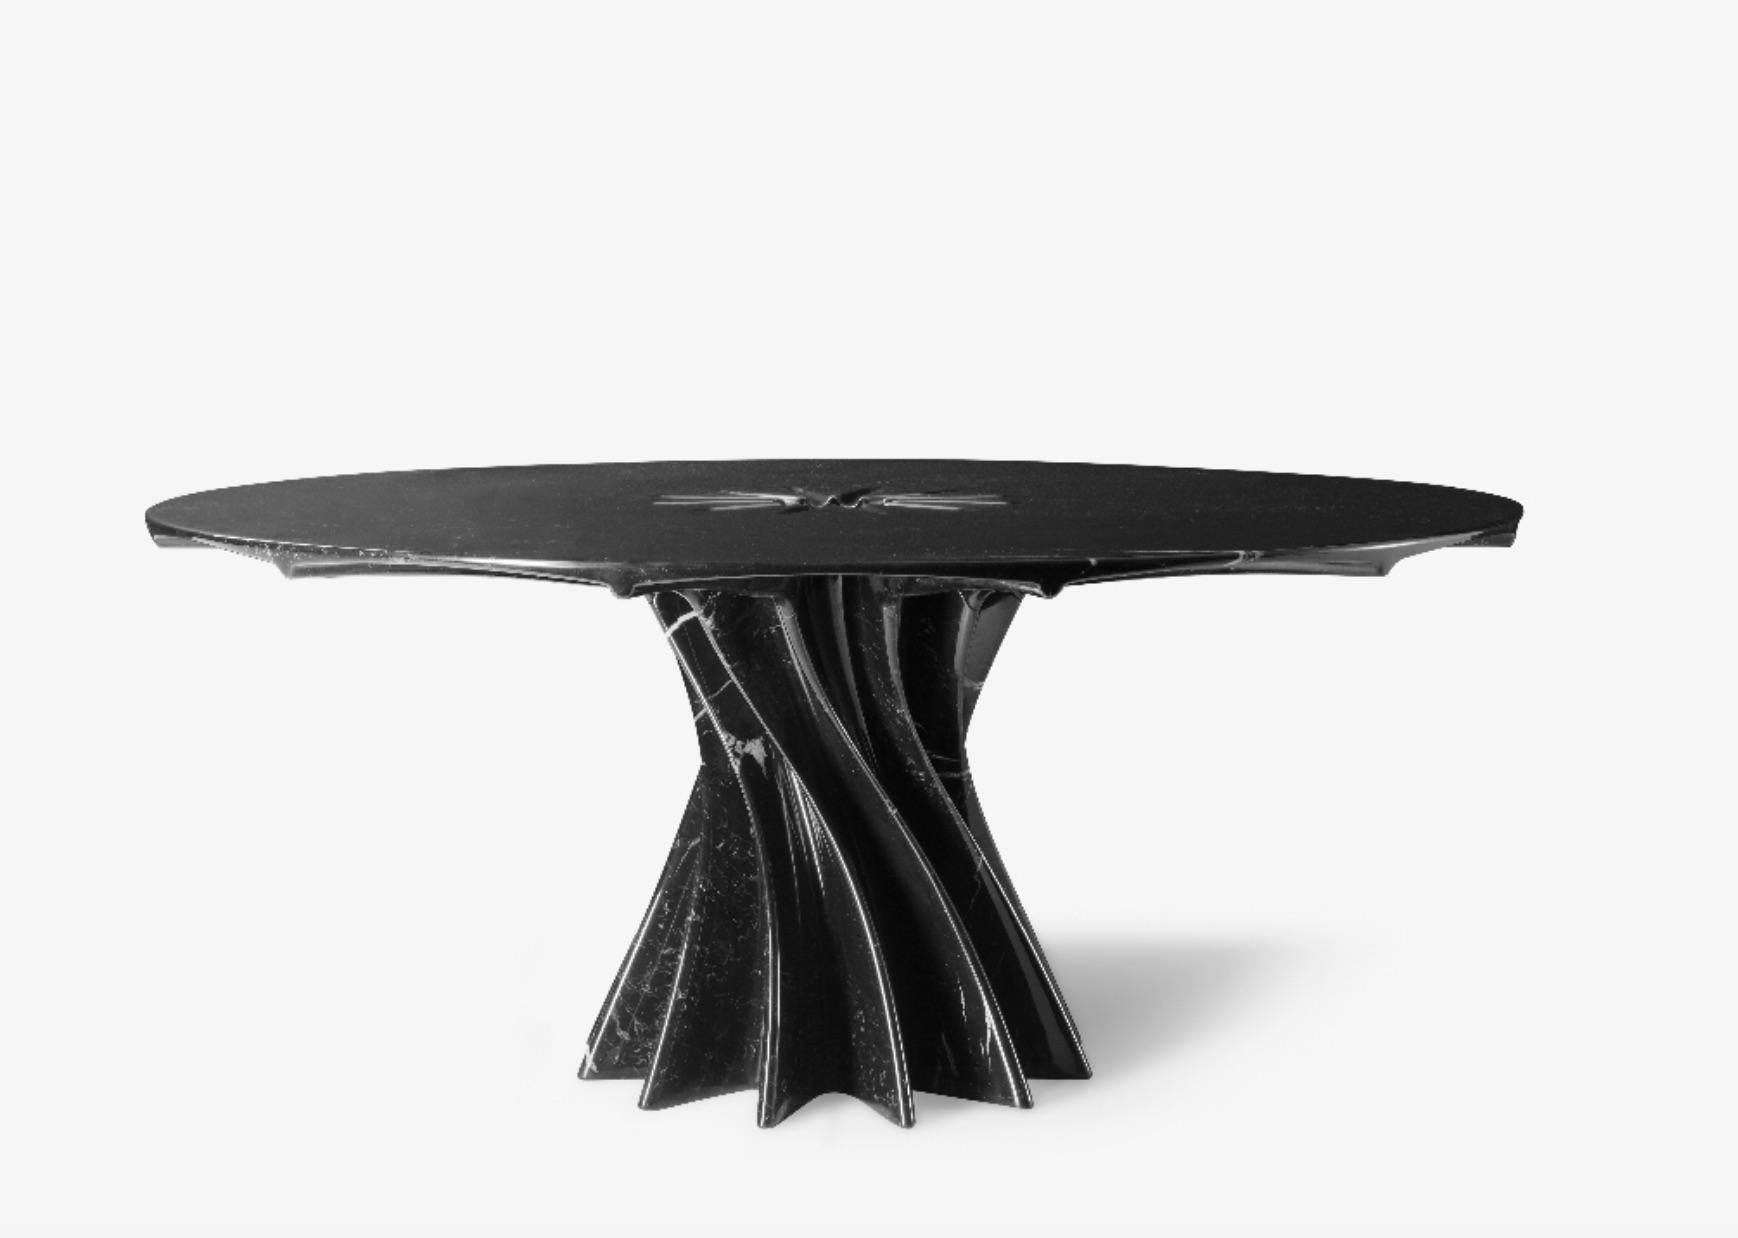 This contemporary polished marble table called the Vortex is designed in a limited edition of 12 by Arik Levy.
The table is a functional sculpture with a dominant presence that is inspired by the powerful energy of a vortex. 

The tabletop